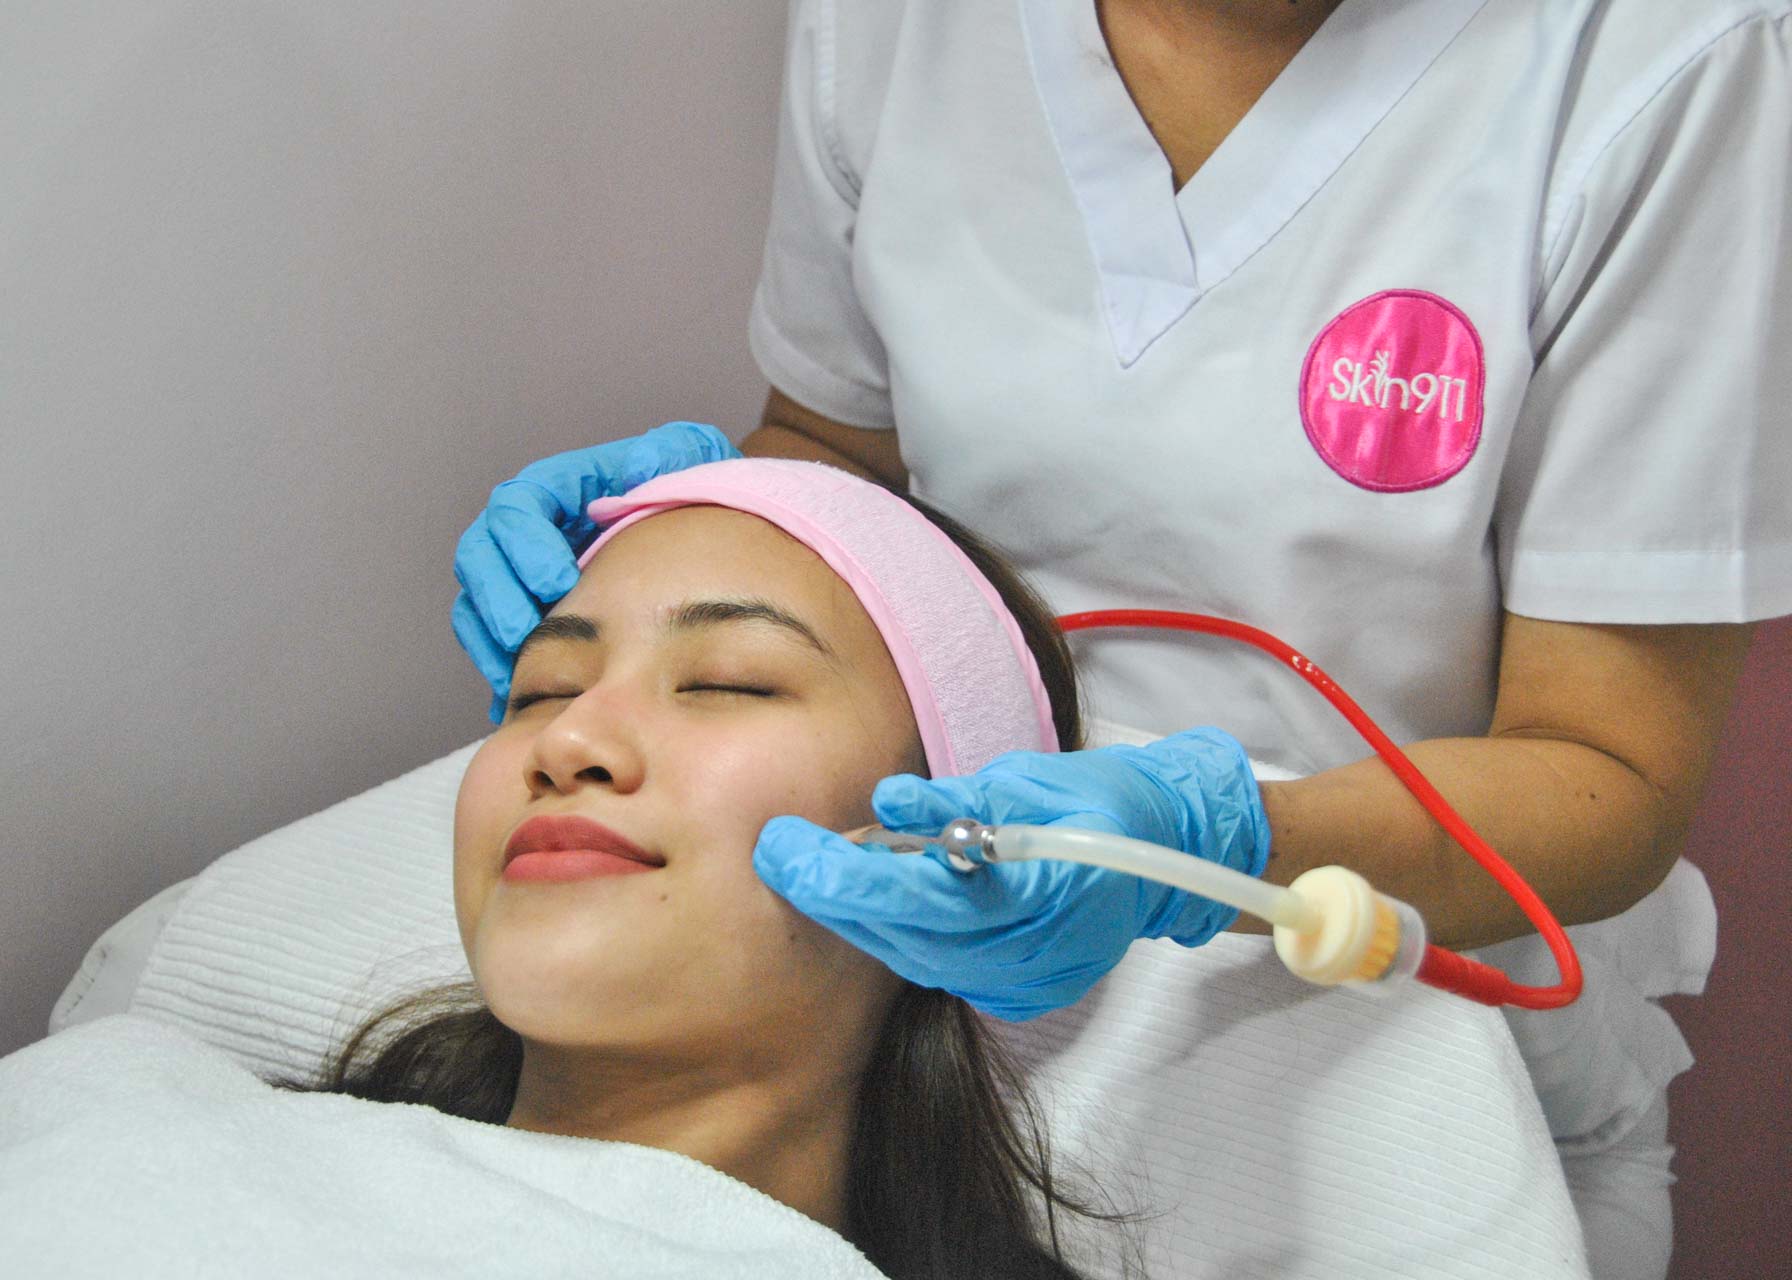 Facial with Acne Laser at Skin 911